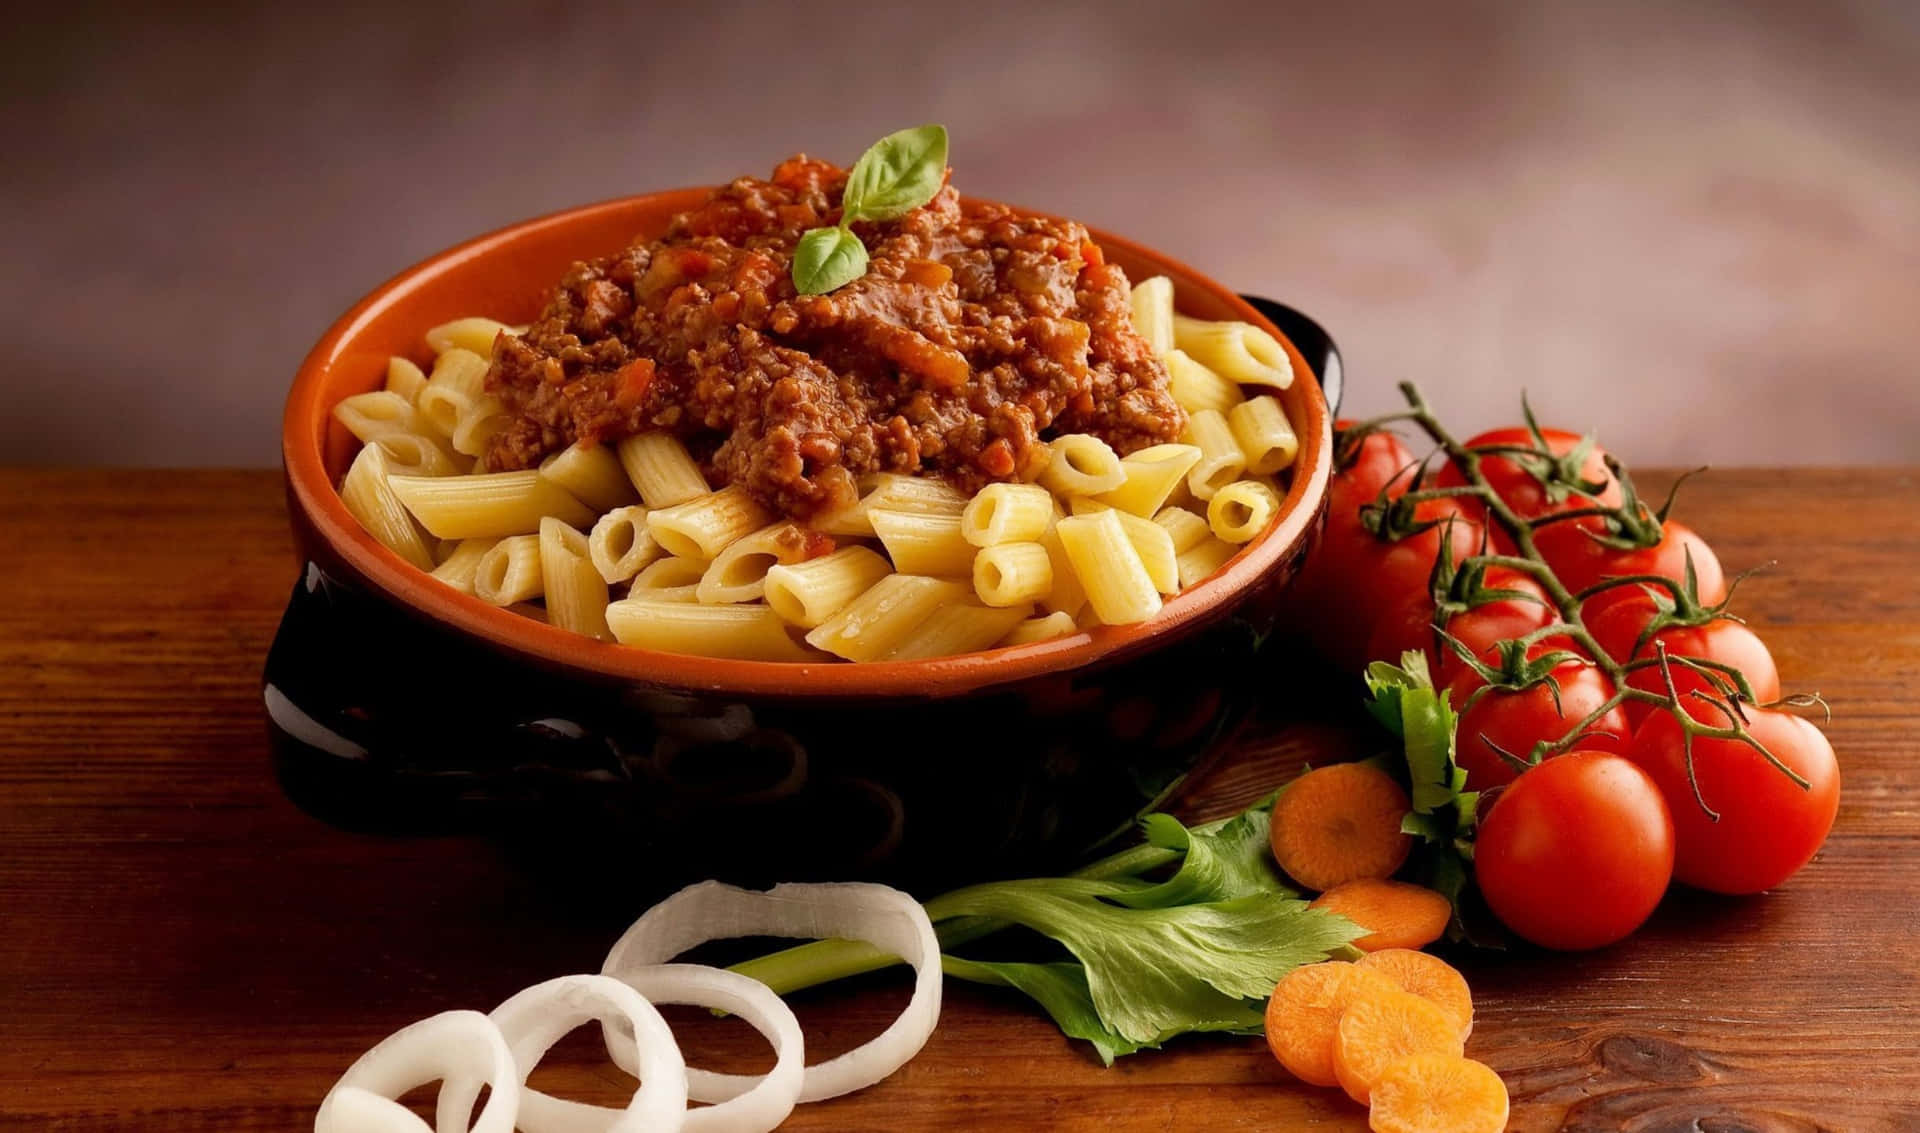 A Bowl Of Pasta With Meat And Vegetables